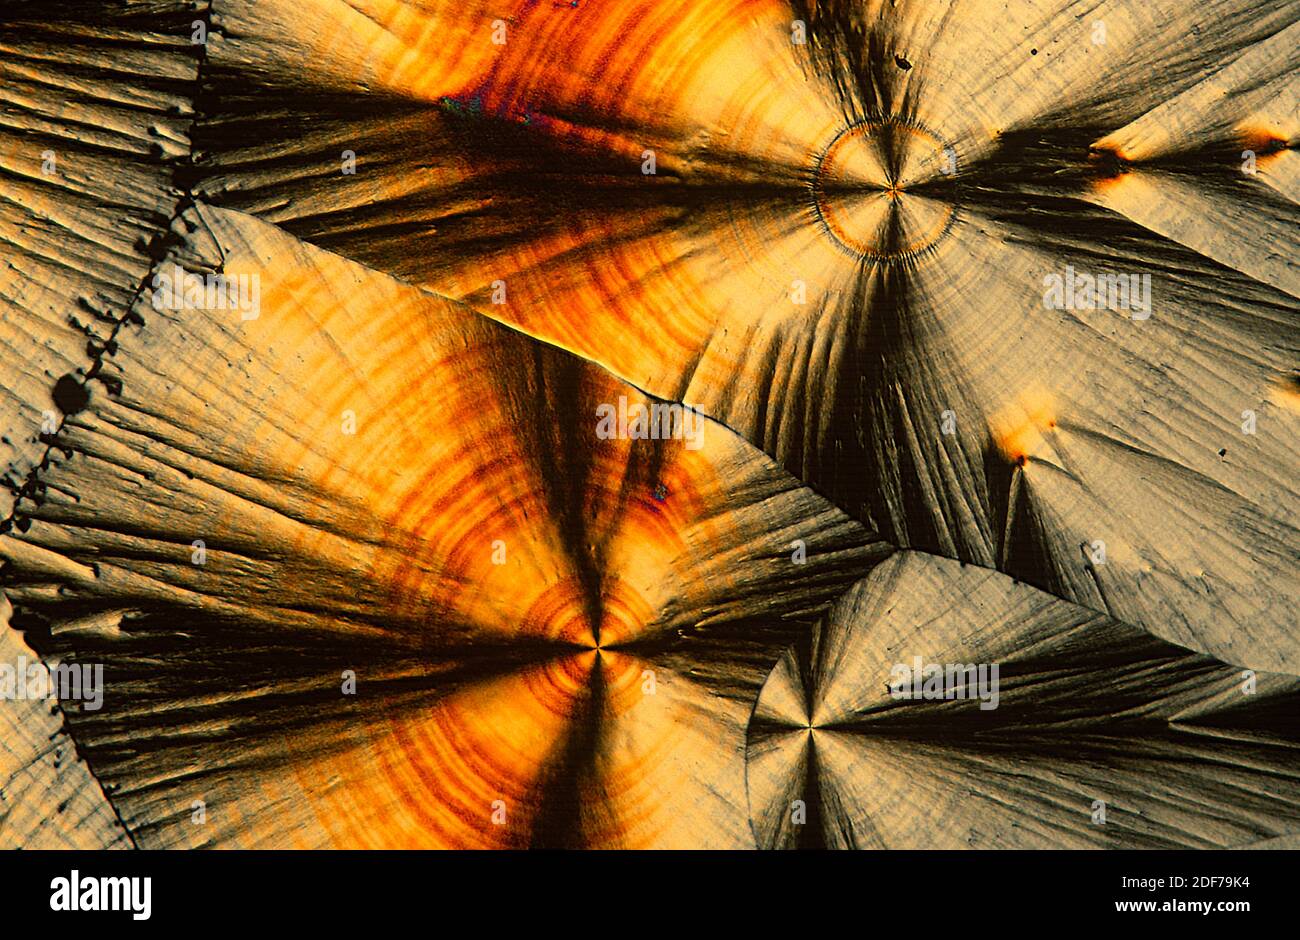 Vitamin C or ascorbic acid is an important antioxidant and collaborate with the immune system. Photomicrograph, polarized light. Stock Photo